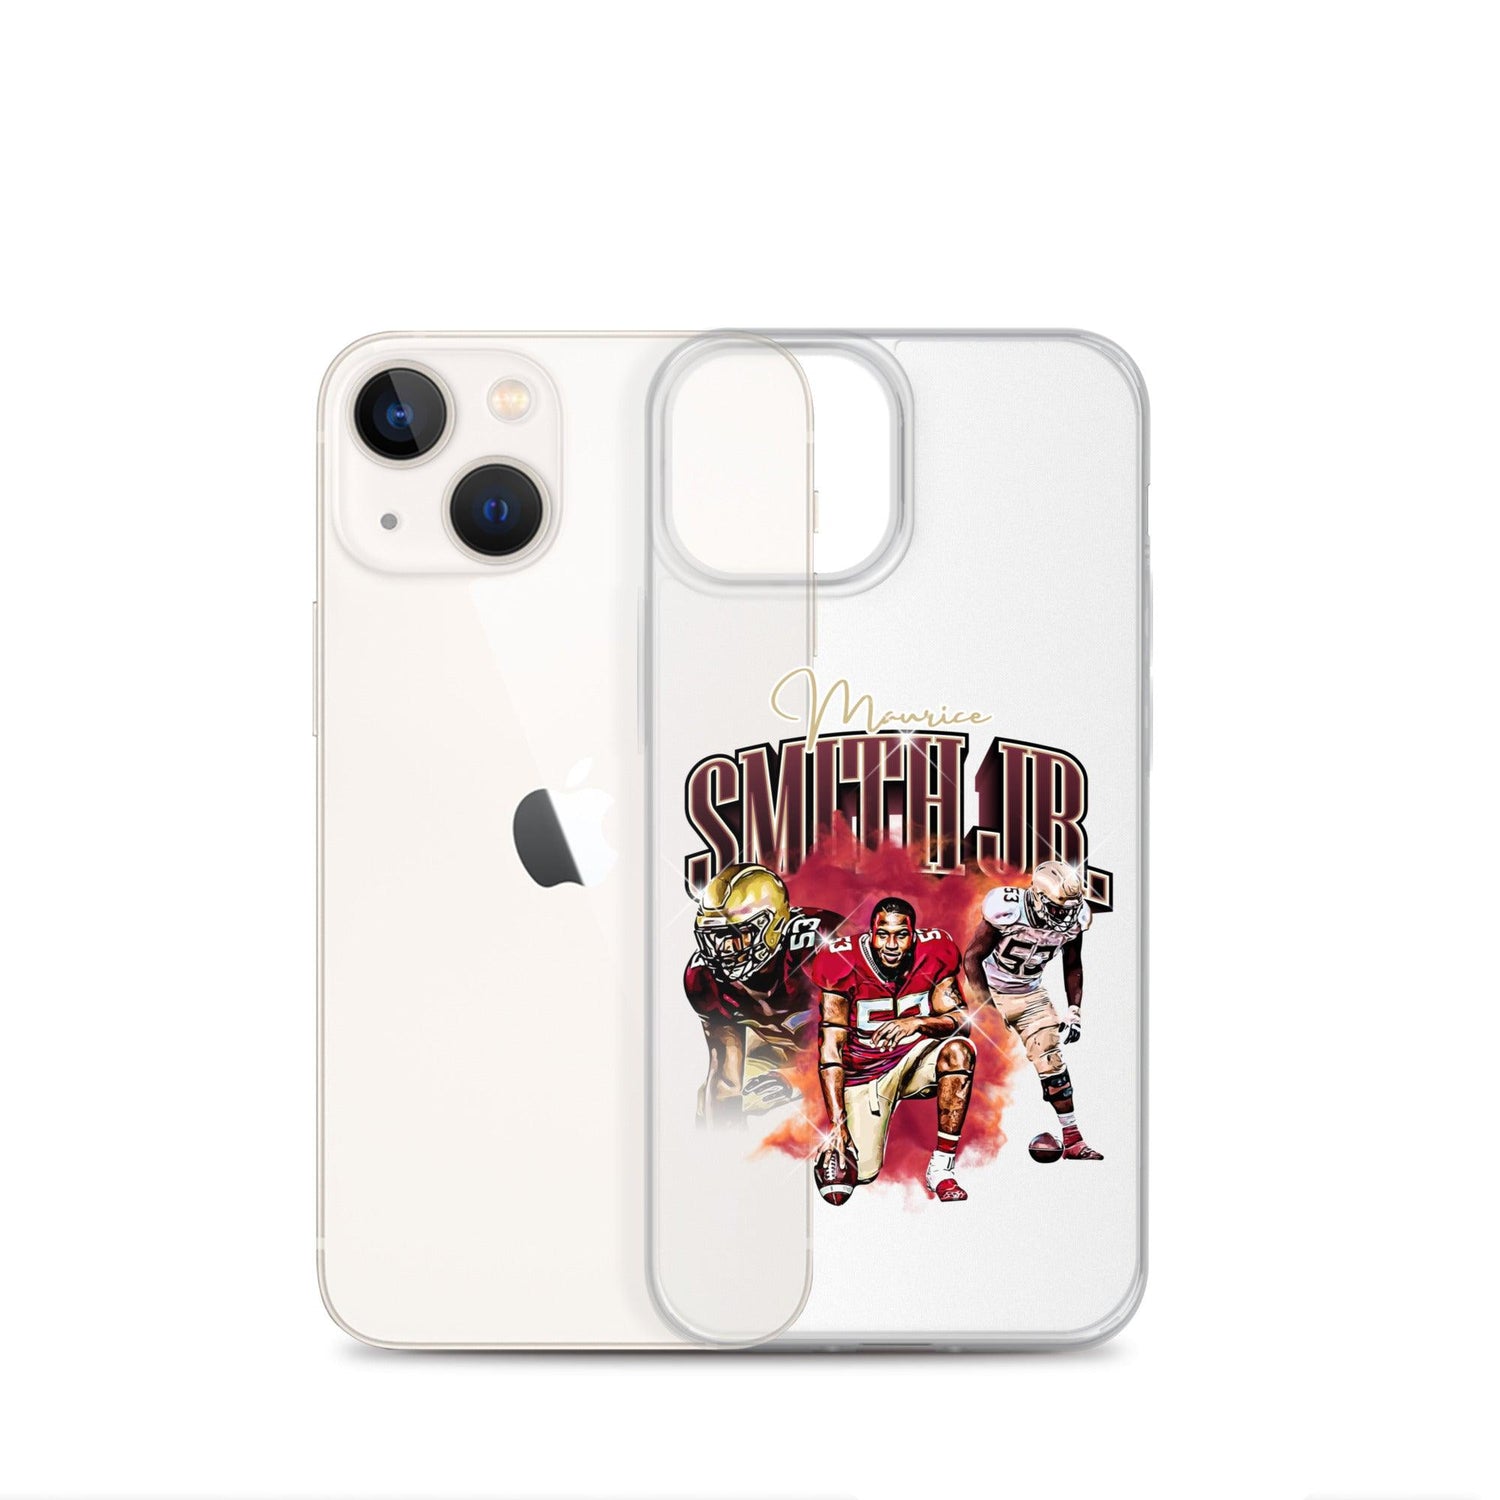 Maurice Smith Jr. "Legacy" iPhone Case - Fan Arch